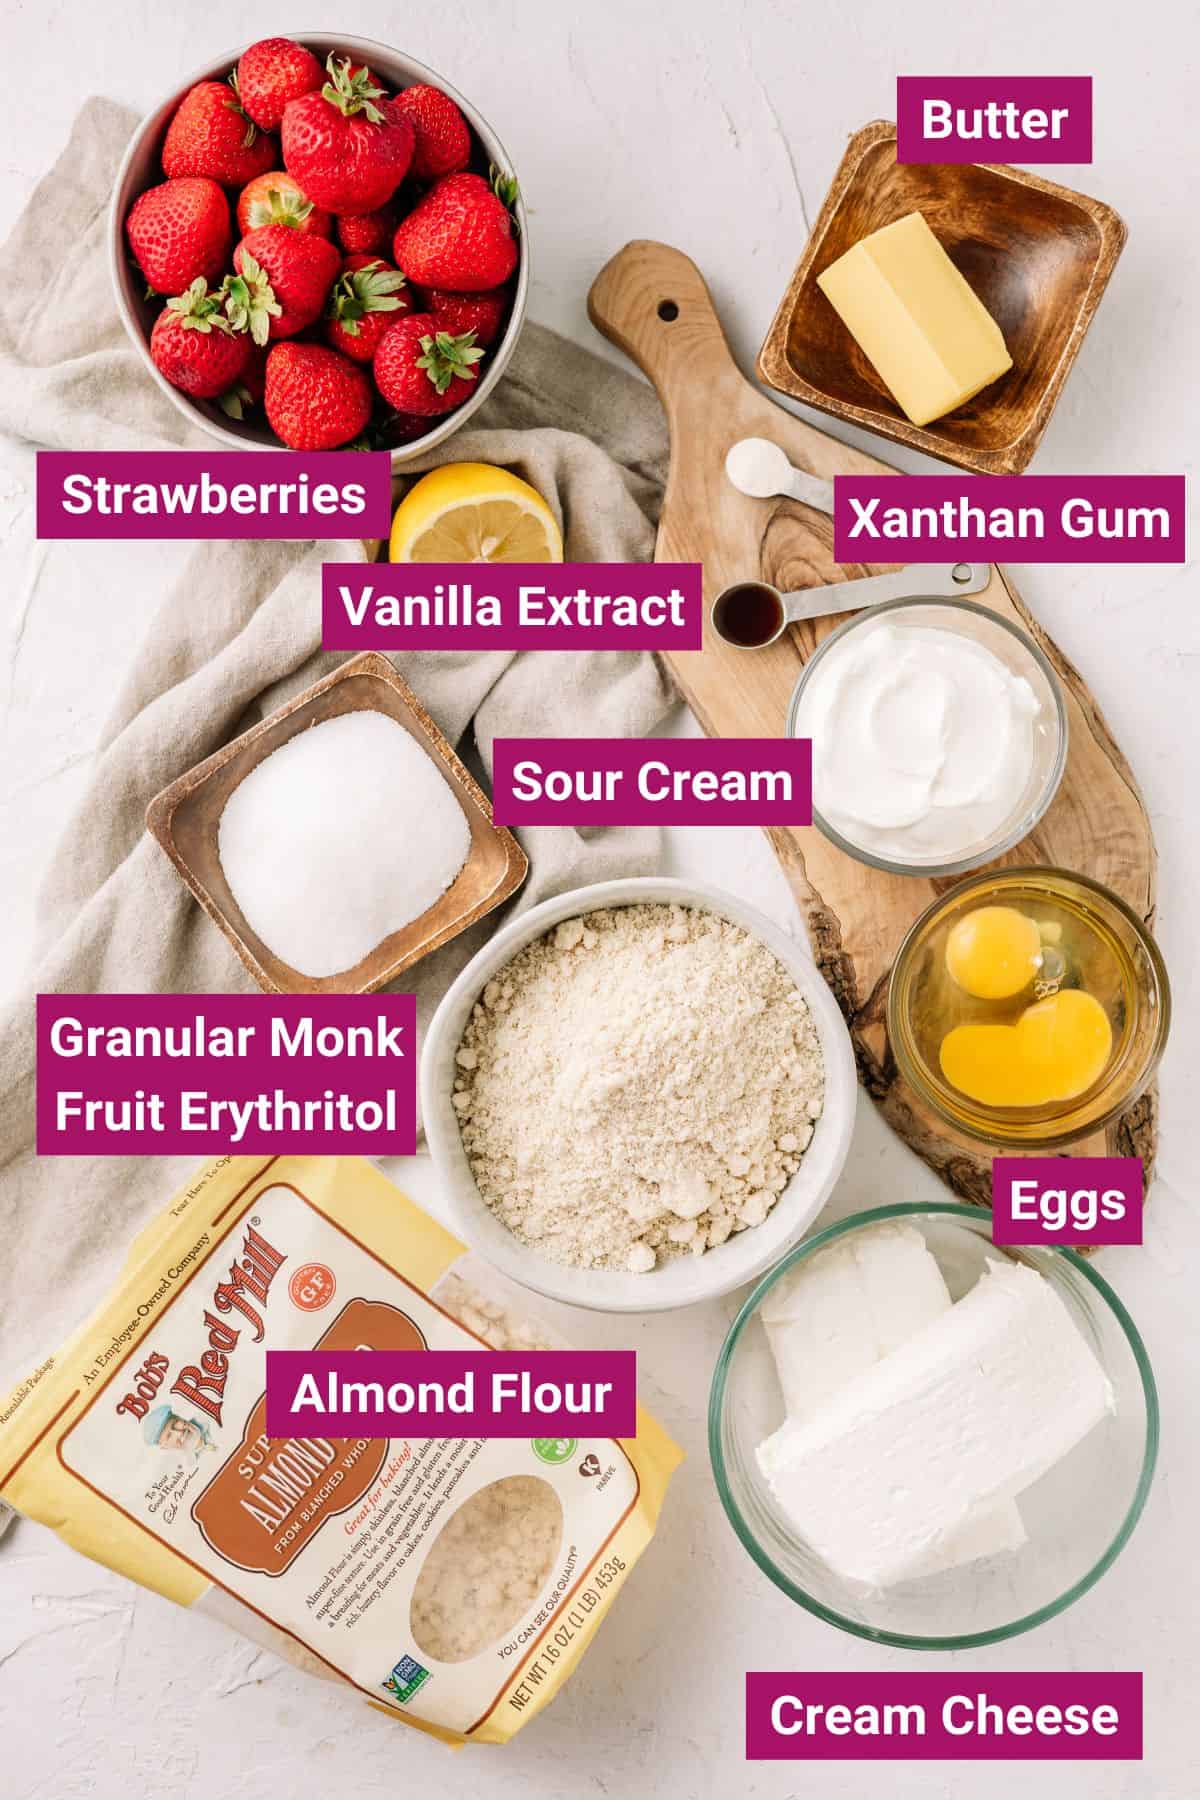 butter, strawberries, vanilla extract, sour cream, xanthan gum, eggs, granular mnk fruit erythritol, eggs, almond flour and cream cheese on separate bowls